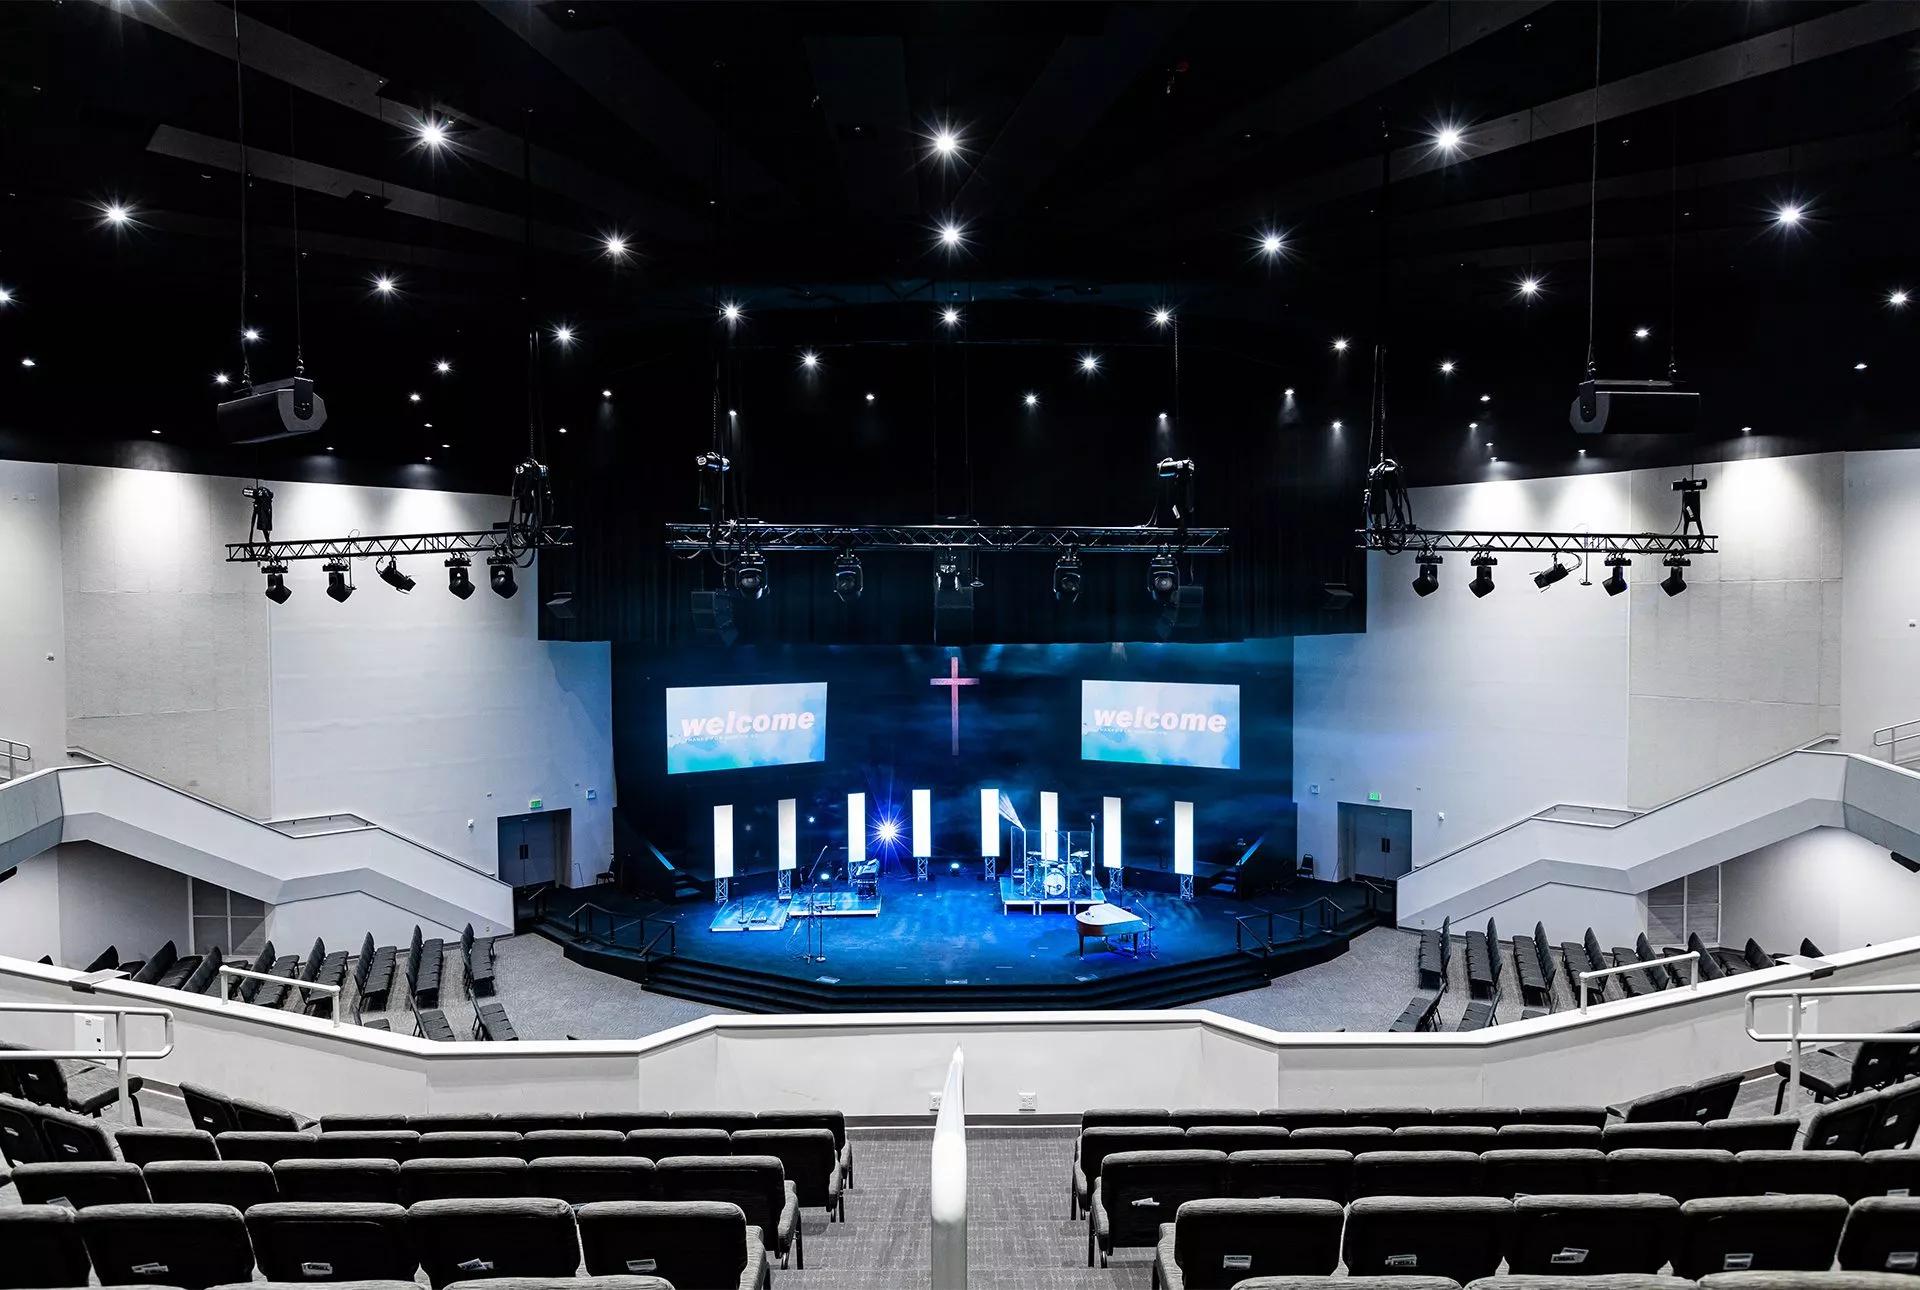 Speakers hang from the ceiling of a large church worship space.